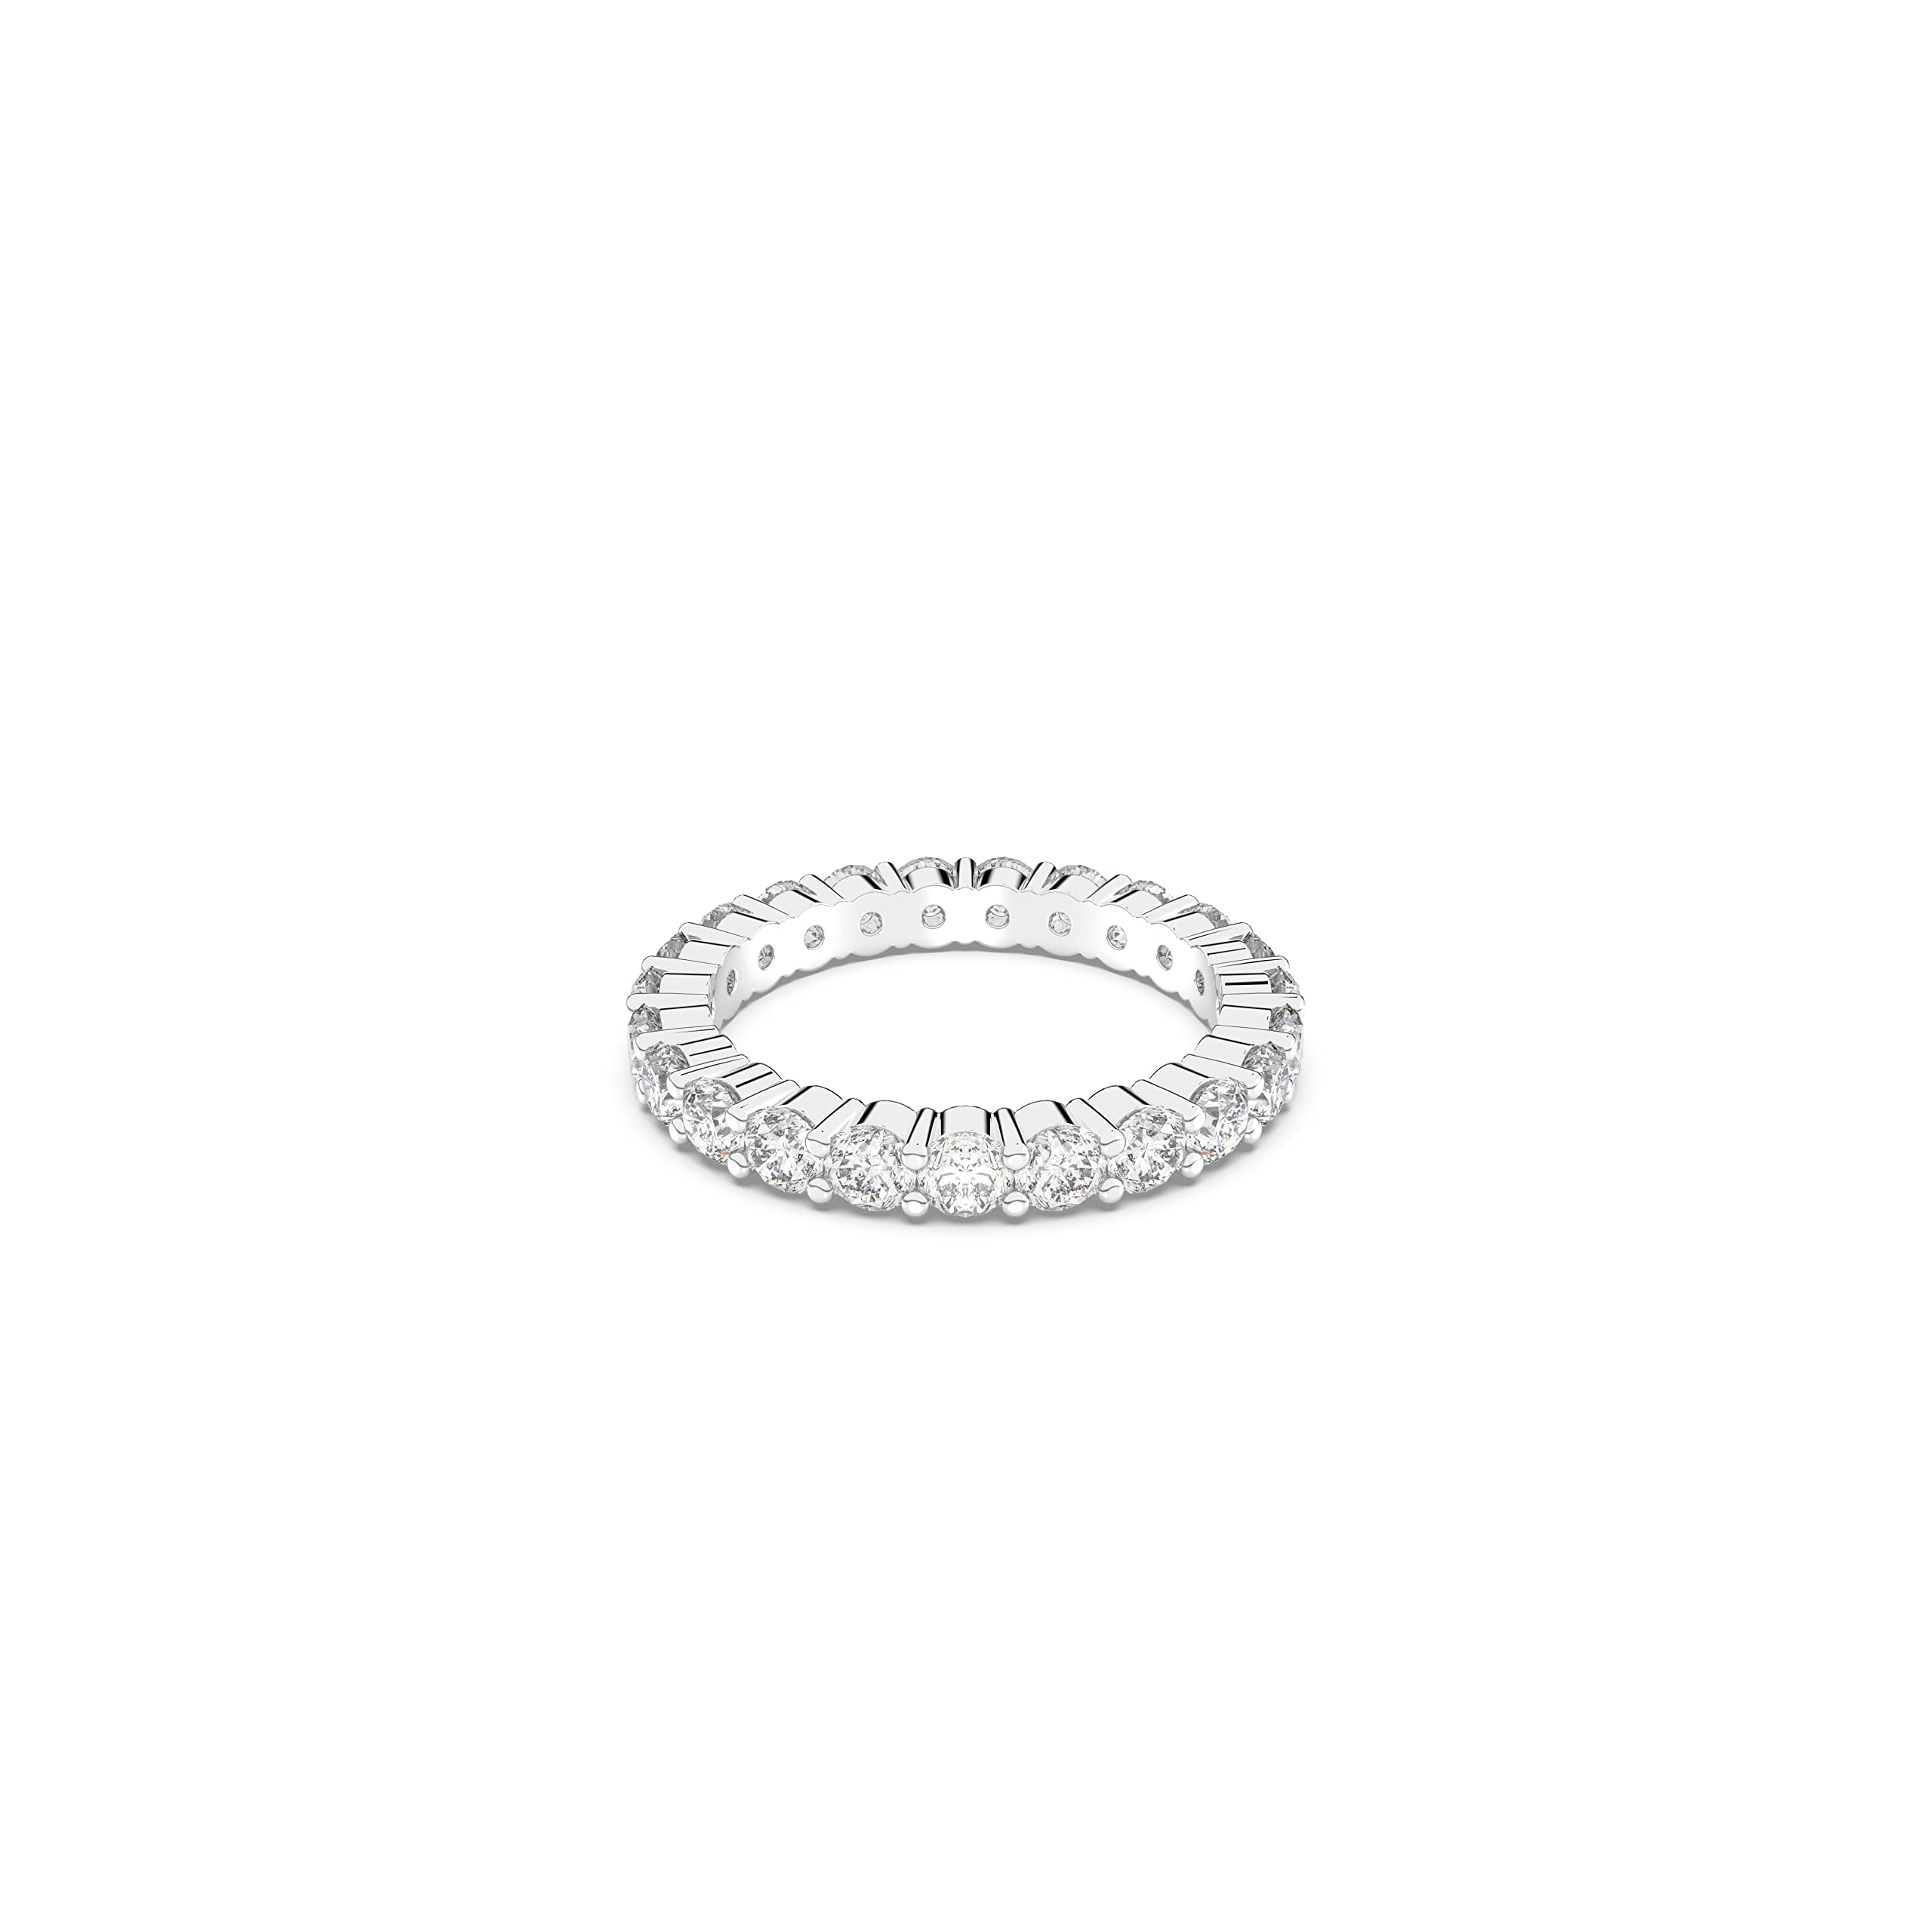 Swarovski Womens Vittore XL Ring, White crystal Stones in a Rhodium Plated Setting, Size 50